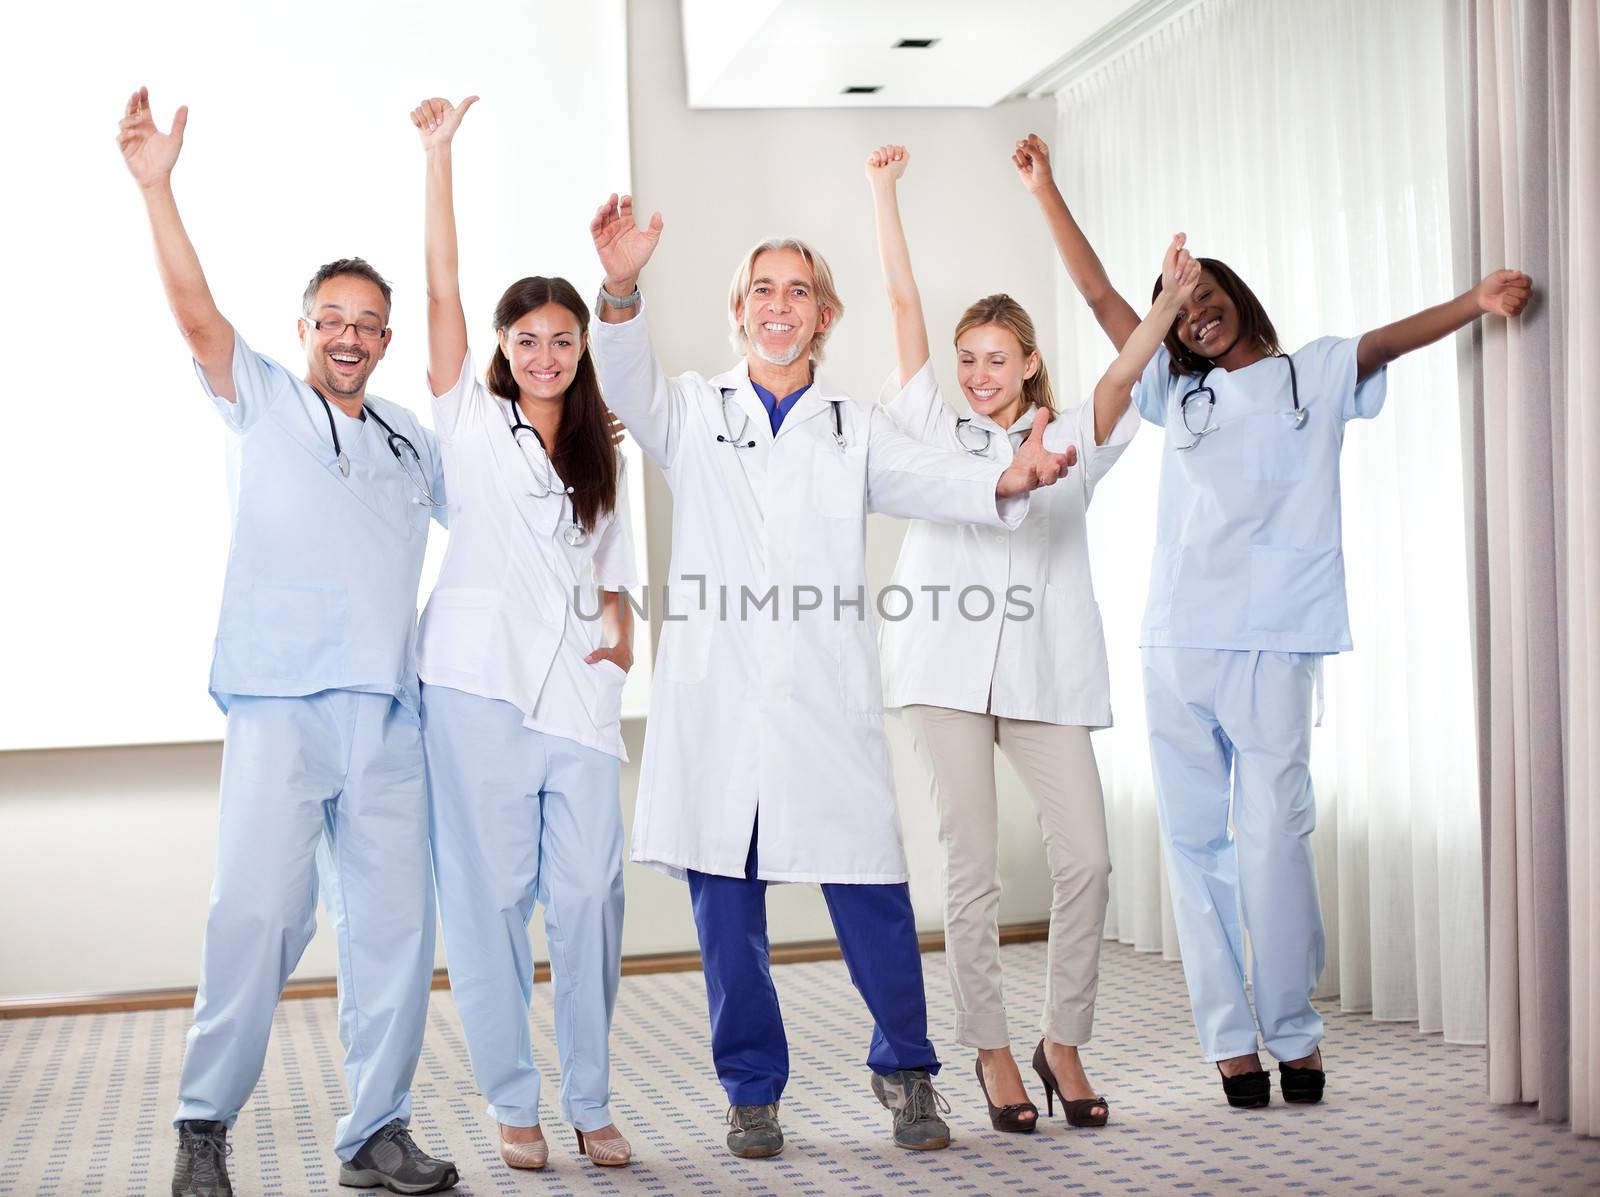 Group of happy doctors smiling and waving by AndreyPopov